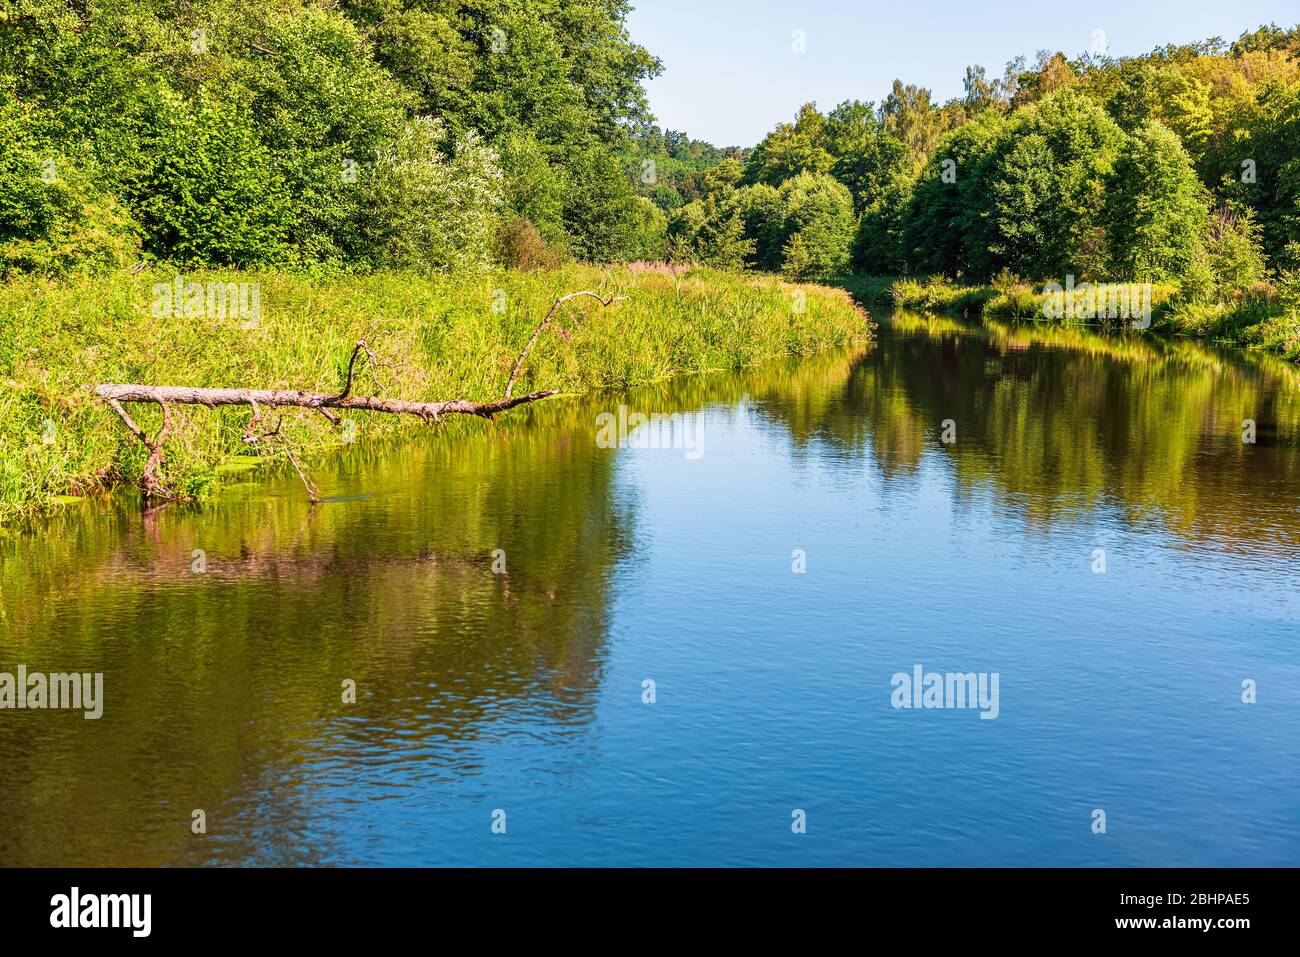 Forest river water reflection landscape. Kayaking and forest tourism Stock Photo